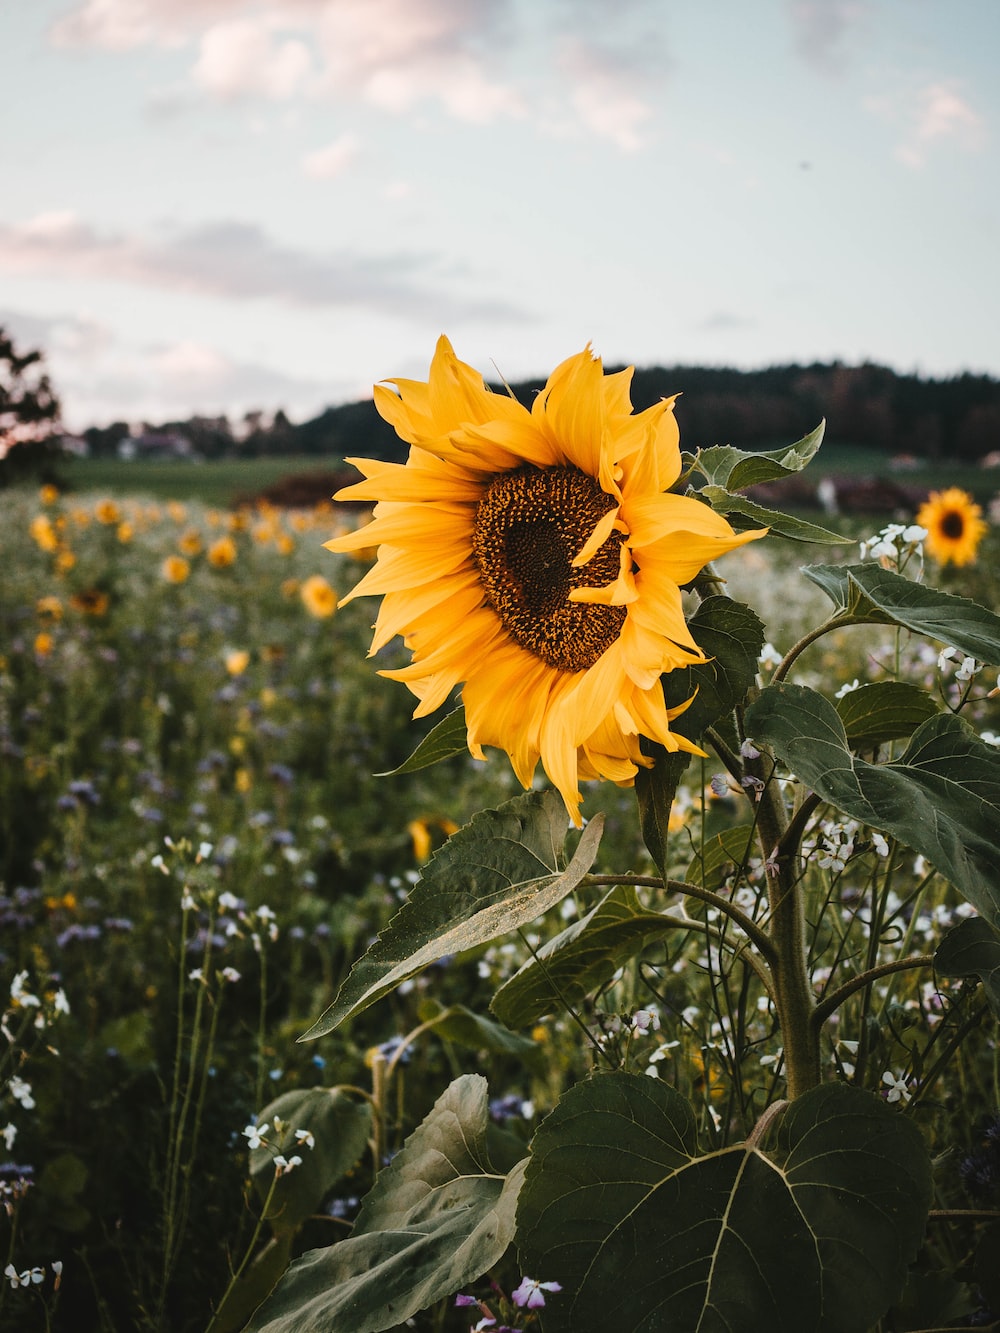 A sunflower is growing in the middle of field - Sunflower